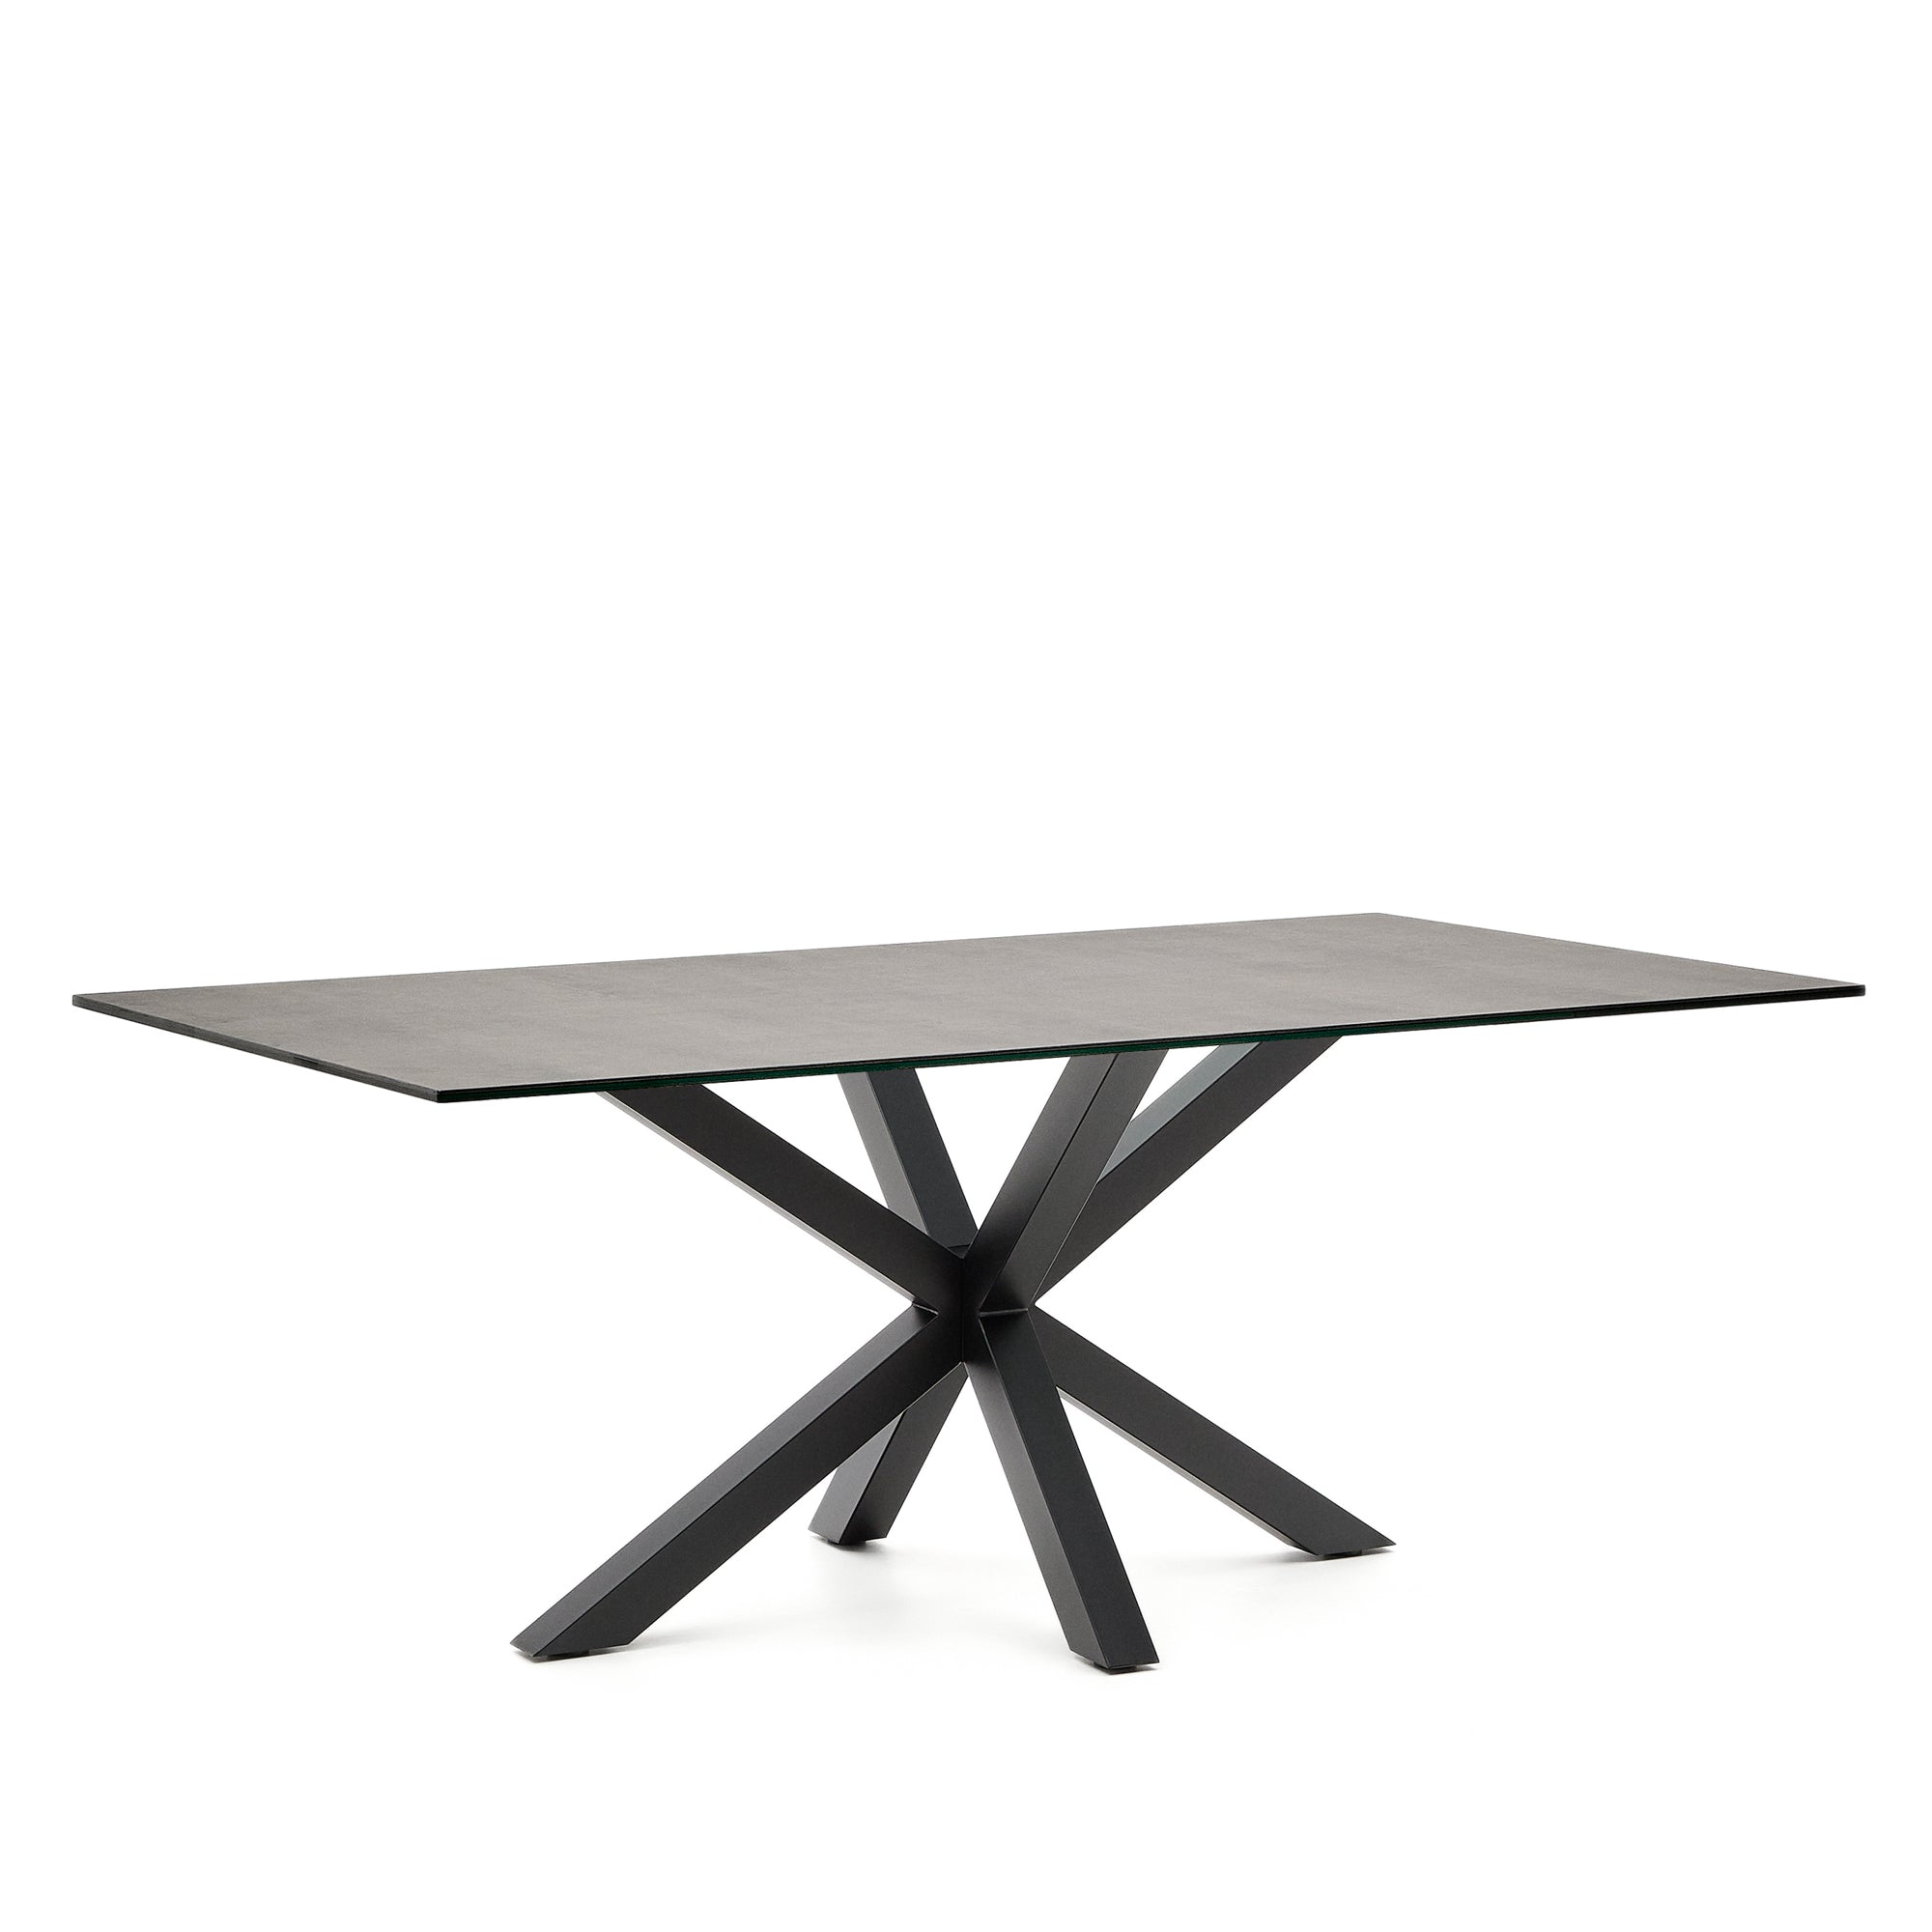 Argo table Iron Moss porcelain and steel legs with black finish, 200 x 100 cm